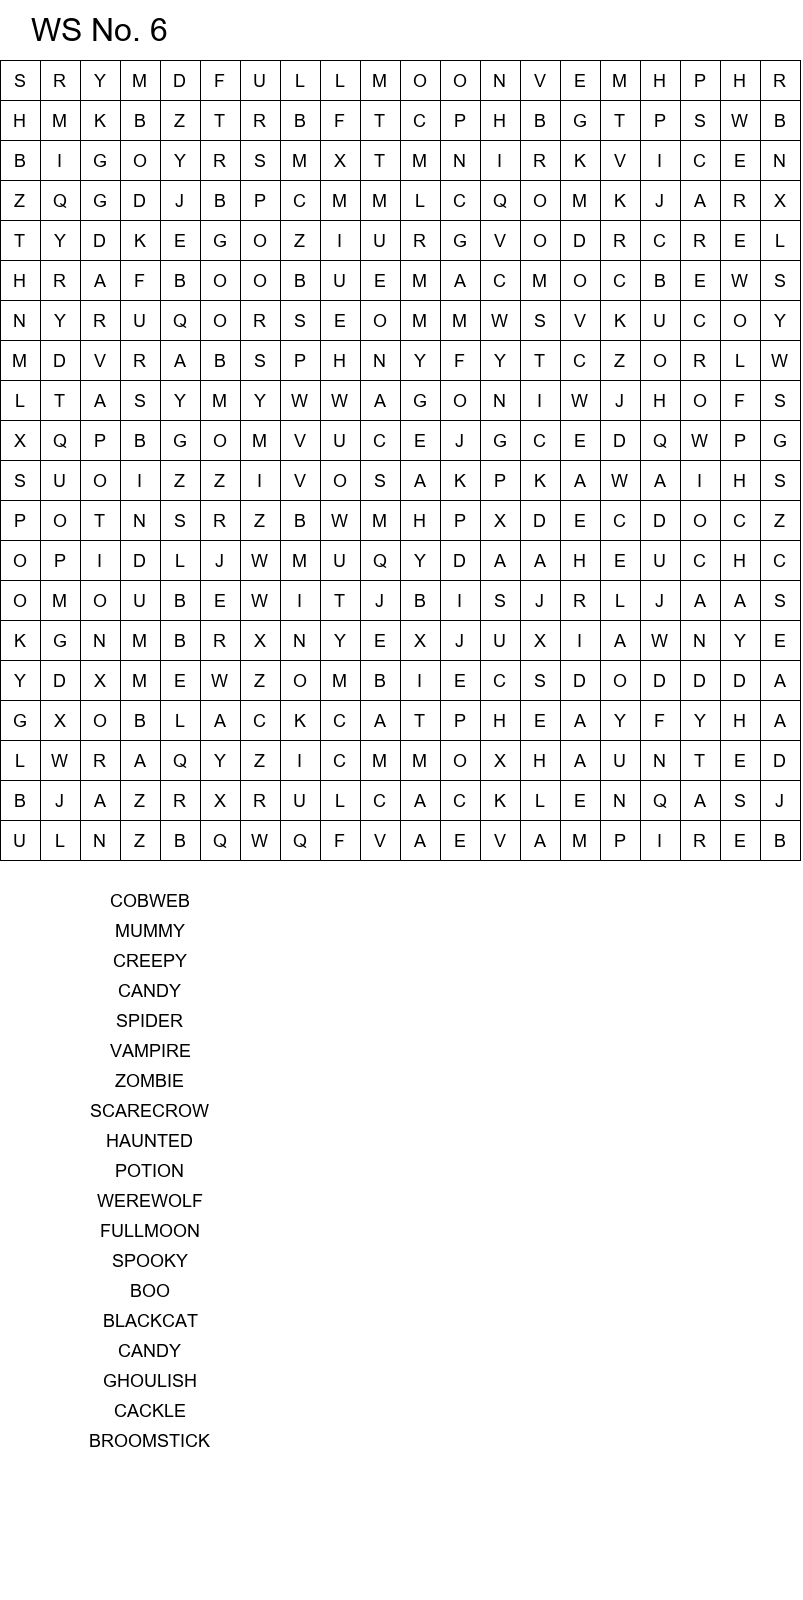 Challenging Halloween word search for teens size 20x20 No 6